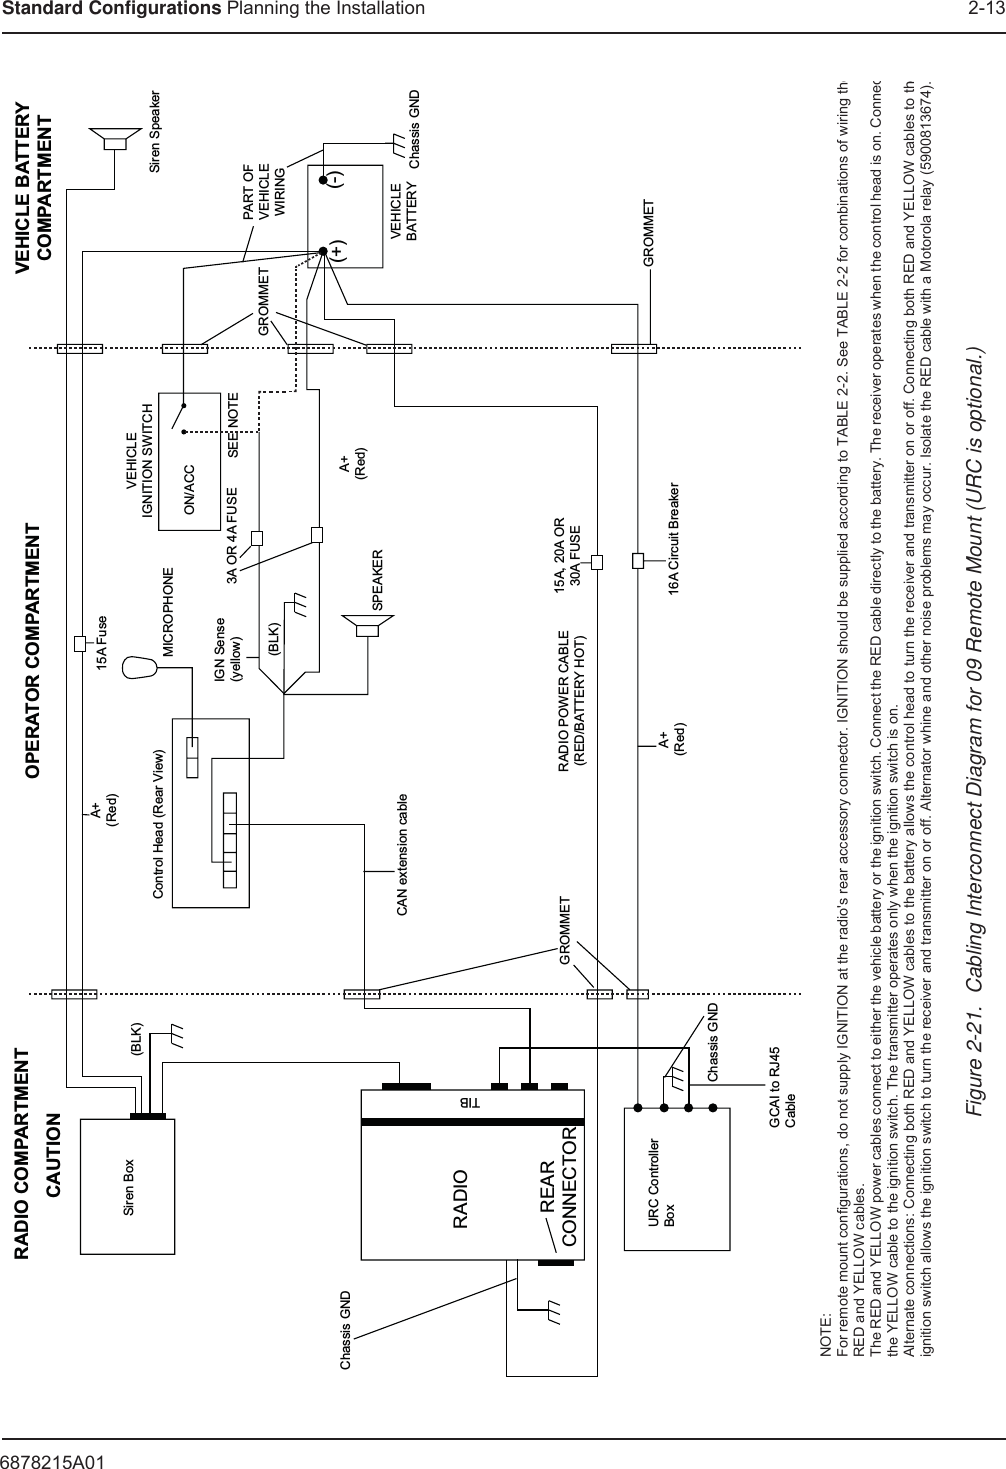 6878215A01Standard Configurations Planning the Installation 2-13RADIO COMPARTMENT OPERATOR COMPARTMENT VEHICLE BATTERYCOMPARTMENTSiren BoxCAUTION(BLK)A+(Red)A+(Red)15A FuseMICROPHONEVEHICLEIGNITION SWITCHVEHICLEBATTERYPART OFVEHICLEWIRINGSiren SpeakerON/ACC3A OR 4A FUSE SEE NOTESPEAKERRADIO POWER CABLE(RED/BATTERY HOT)15A, 20A OR30A FUSE16A Circuit BreakerGROMMETGROMMETGROMMETREARCONNECTORURC ControllerBoxChassis GNDGCAI to RJ45CableRADIOTIBChassis GNDCAN extension cableA+(Red)IGN Sense(yellow)(BLK)Control Head (Rear View)Chassis GND(+) (-)Figure 2-21.  Cabling Interconnect Diagram for 09 Remote Mount (URC is optional.)NOTE:For remote mount configurations, do not supply IGNITION at the radio&apos;s rear accessory connector. IGNITION should be supplied according to TABLE 2-2. See TABLE 2-2 for combinations of wiring theRED and YELLOW cables.The RED and YELLOW power cables connect to either the vehicle battery or the ignition switch. Connect the RED cable directly to the battery. The receiver operates when the control head is on. Connecthe YELLOW cable to the ignition switch. The transmitter operates only when the ignition switch is on.Alternate connections: Connecting both RED and YELLOW cables to the battery allows the control head to turn the receiver and transmitter on or off. Connecting both RED and YELLOW cables to theignition switch allows the ignition switch to turn the receiver and transmitter on or off. Alternator whine and other noise problems may occur. Isolate the RED cable with a Motorola relay (5900813674).